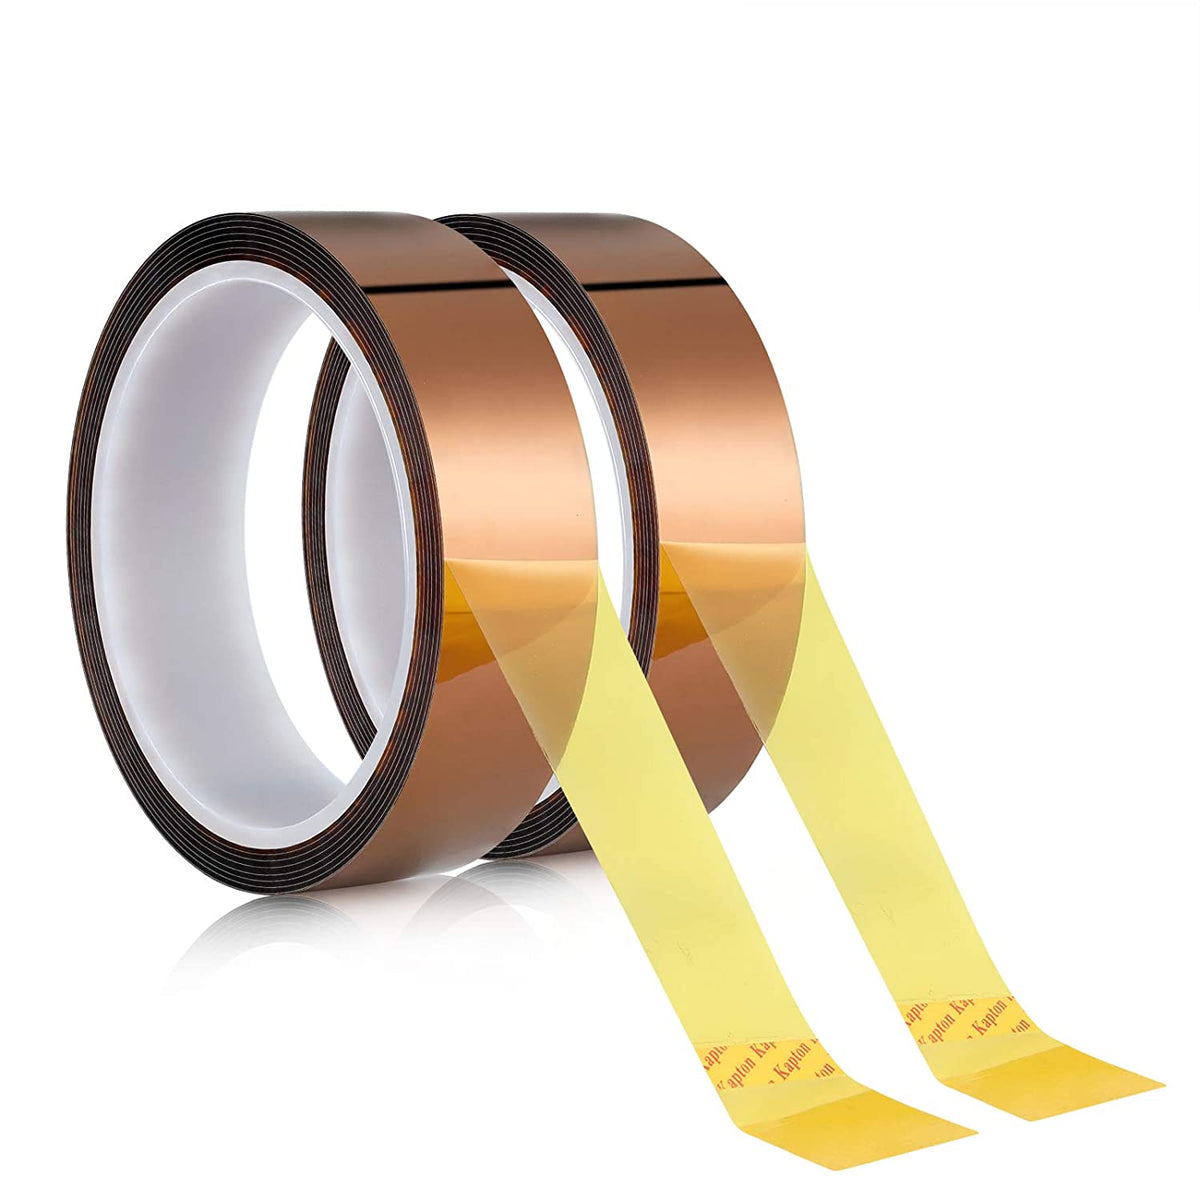 Heat Tape High Temperature 50mmx33m Sublimation Tape Yellow - 50mm - Bed  Bath & Beyond - 38196880